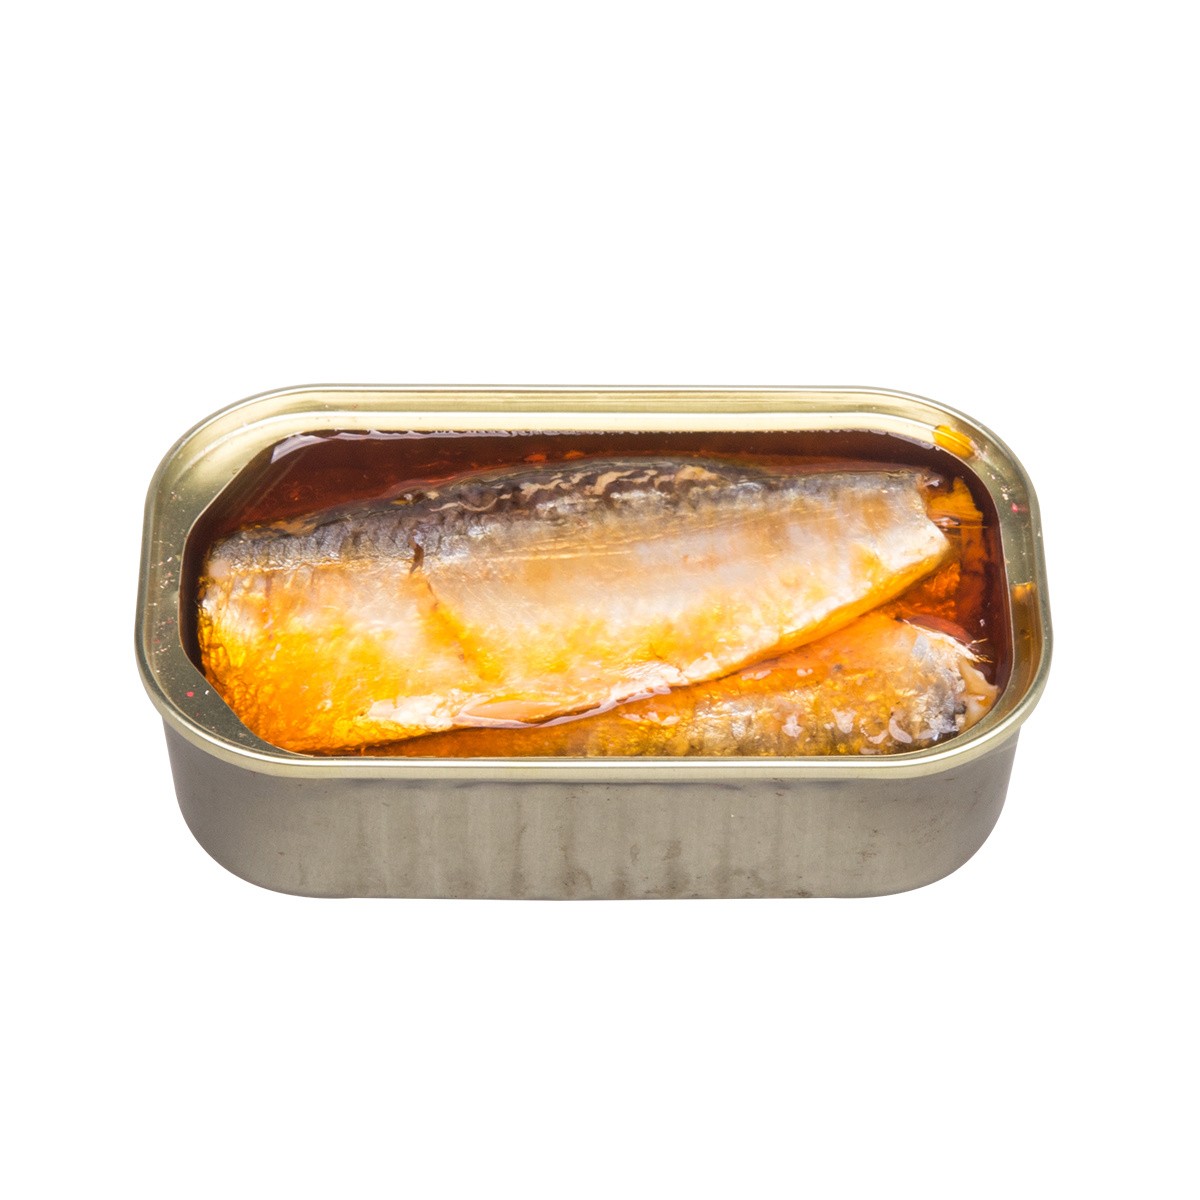 Manufacture 125g*50tins Cheap Canned Sardines Morocco Exports